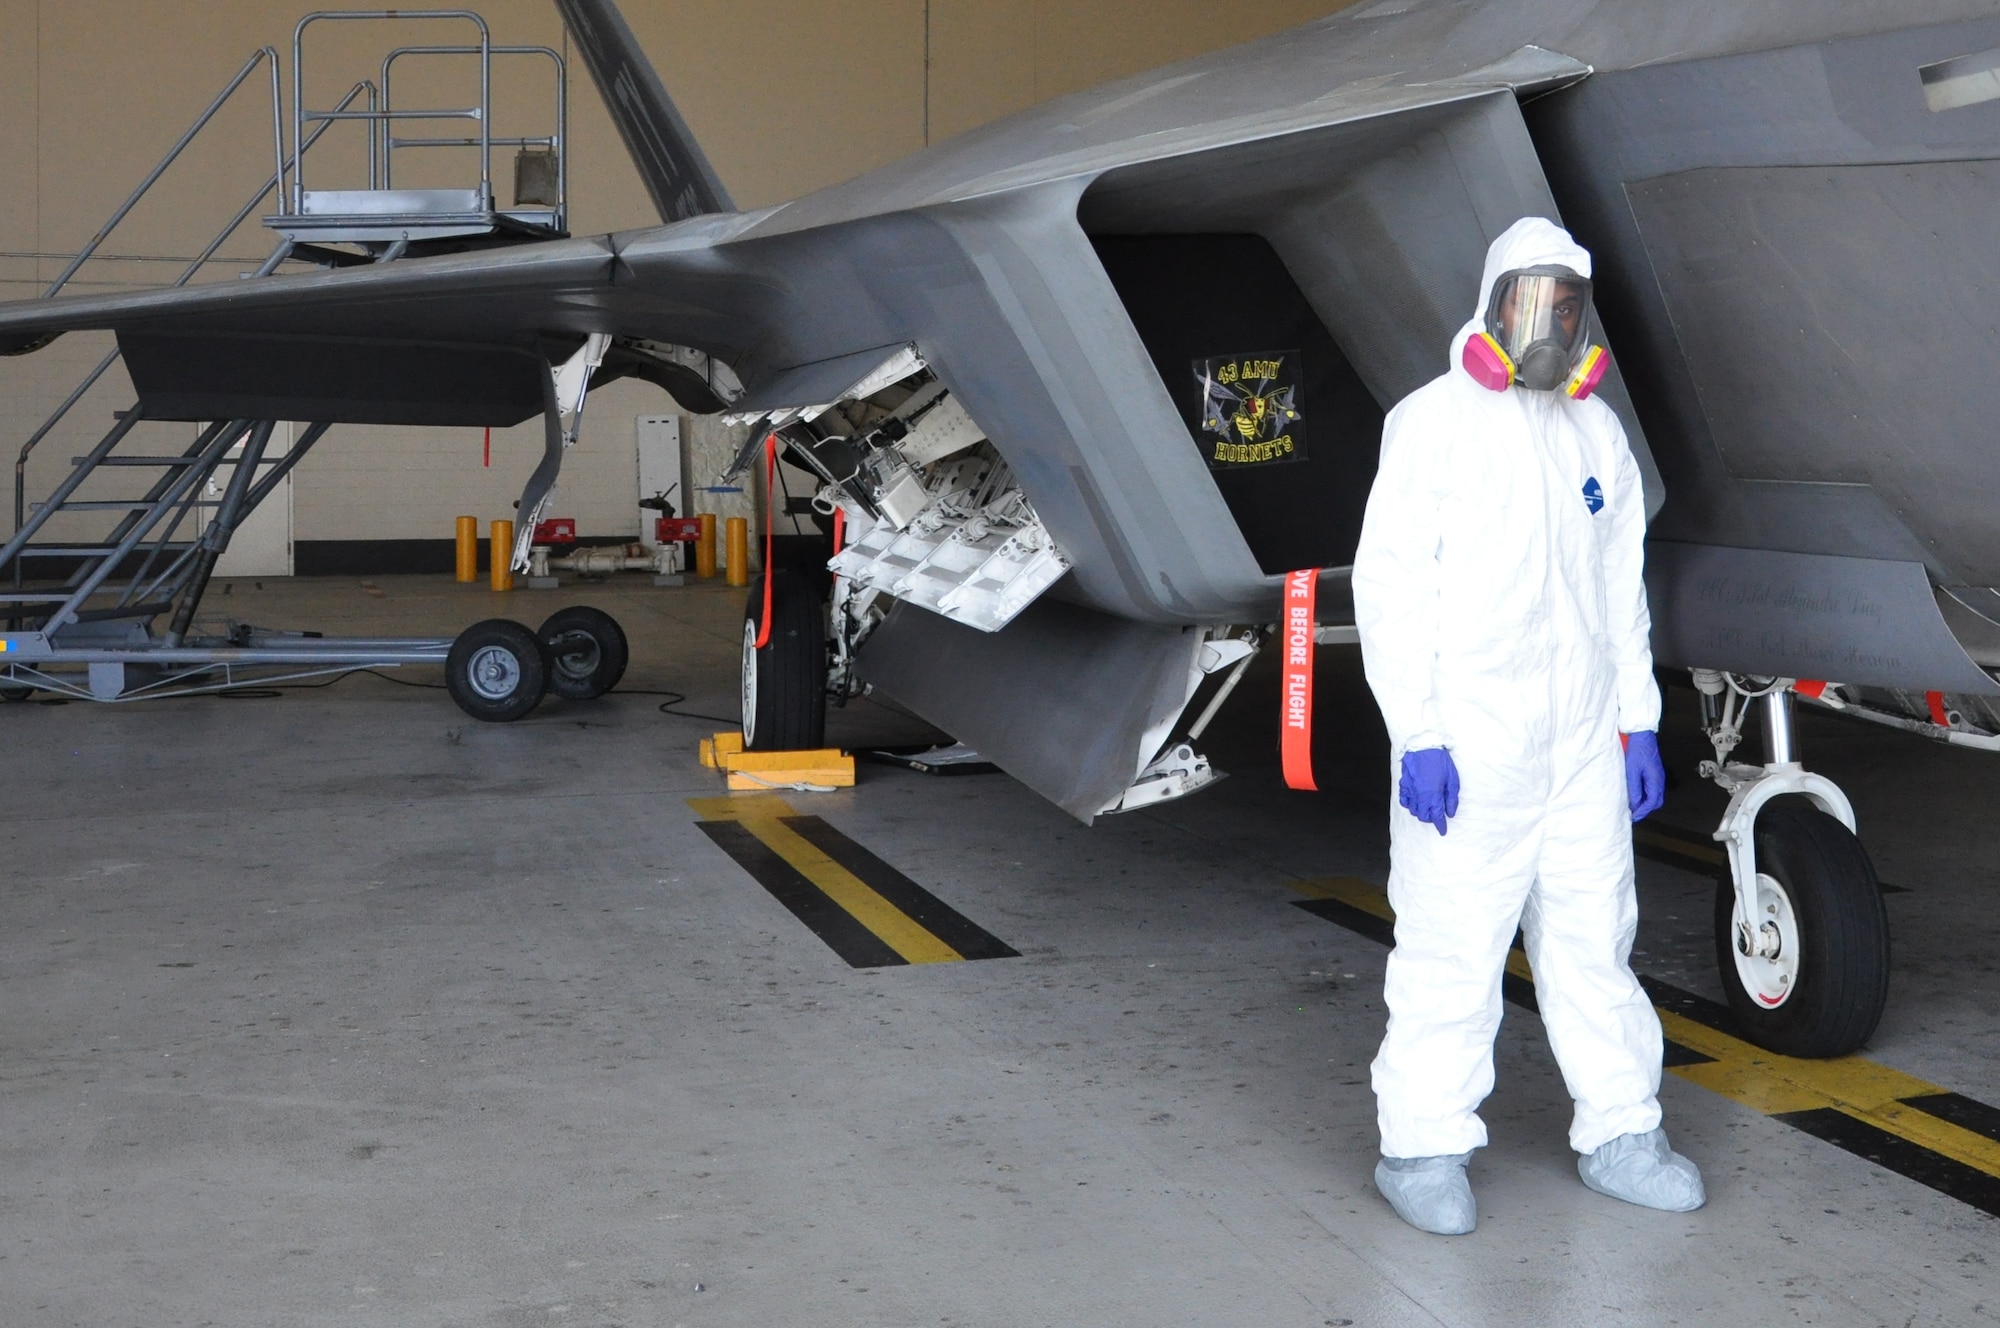 Airman 1st Class Freddie Newman, 325th MXS Low Observable apprentice poses next to an F-22 Raptor Aug. 1 at Tyndall Air Force Base. The 325th Maintenance Squadron Low Observable makes sure the F-22 s at Tyndall maintain their stealth capabilities by restoring and maintaining the Low Observable coatings on the aircraft. (U.S. Air Force photo by Airman 1st Class Alex Echols)